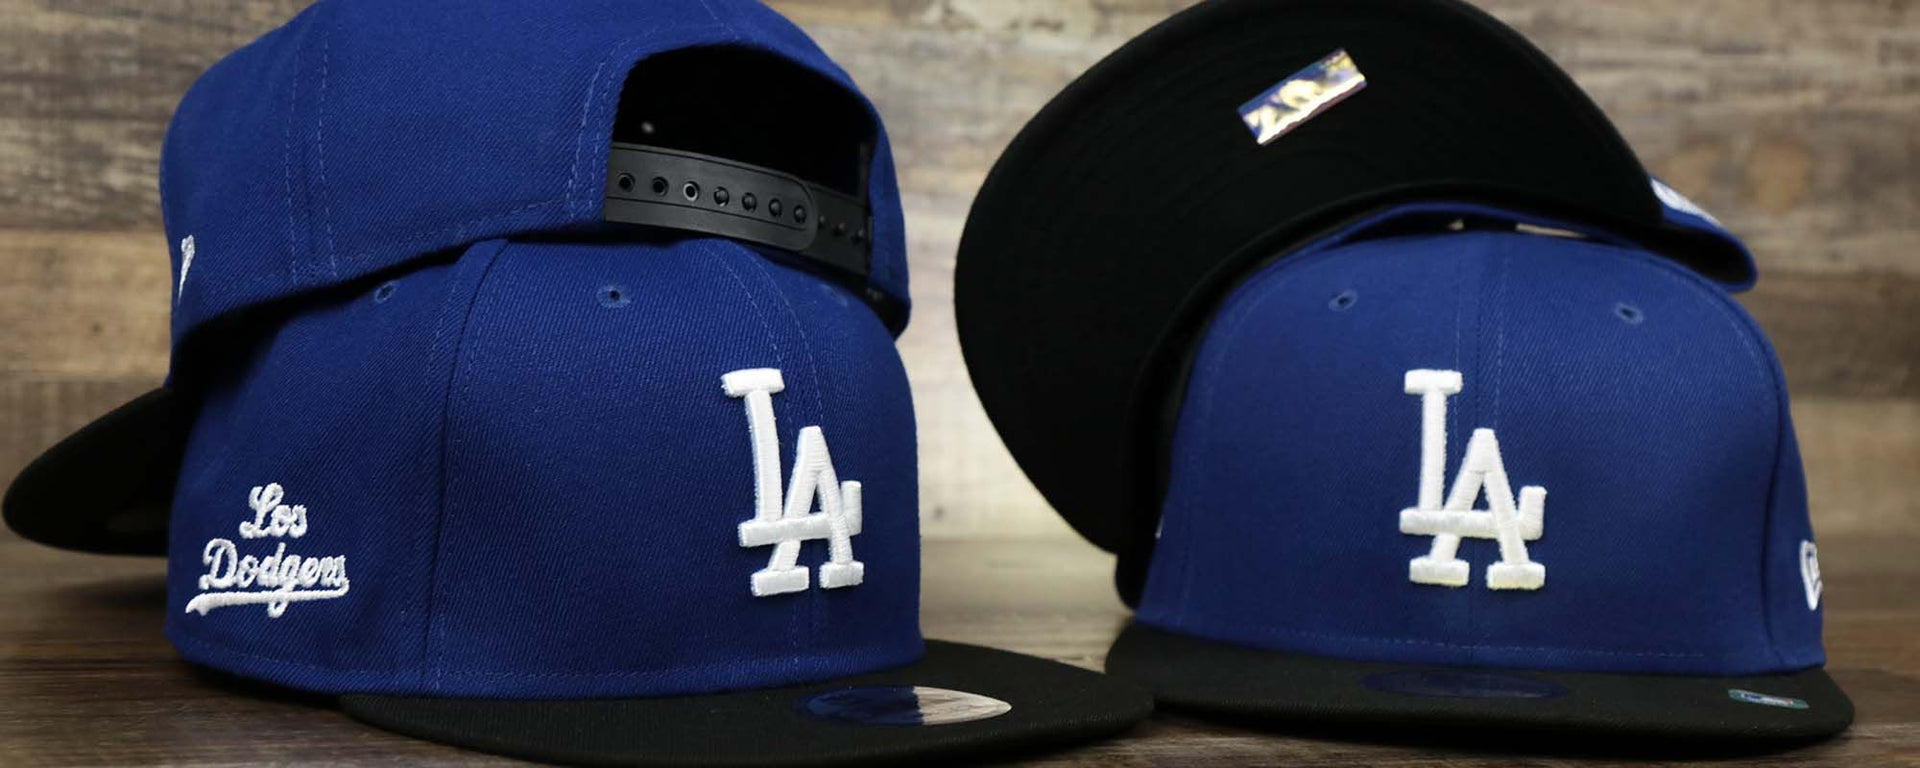 CIty Connect 2022 Custom Fitted Caps | 9Fifty Official 2022 City Connect Snapbacks | Caps fom 2022 City Connect